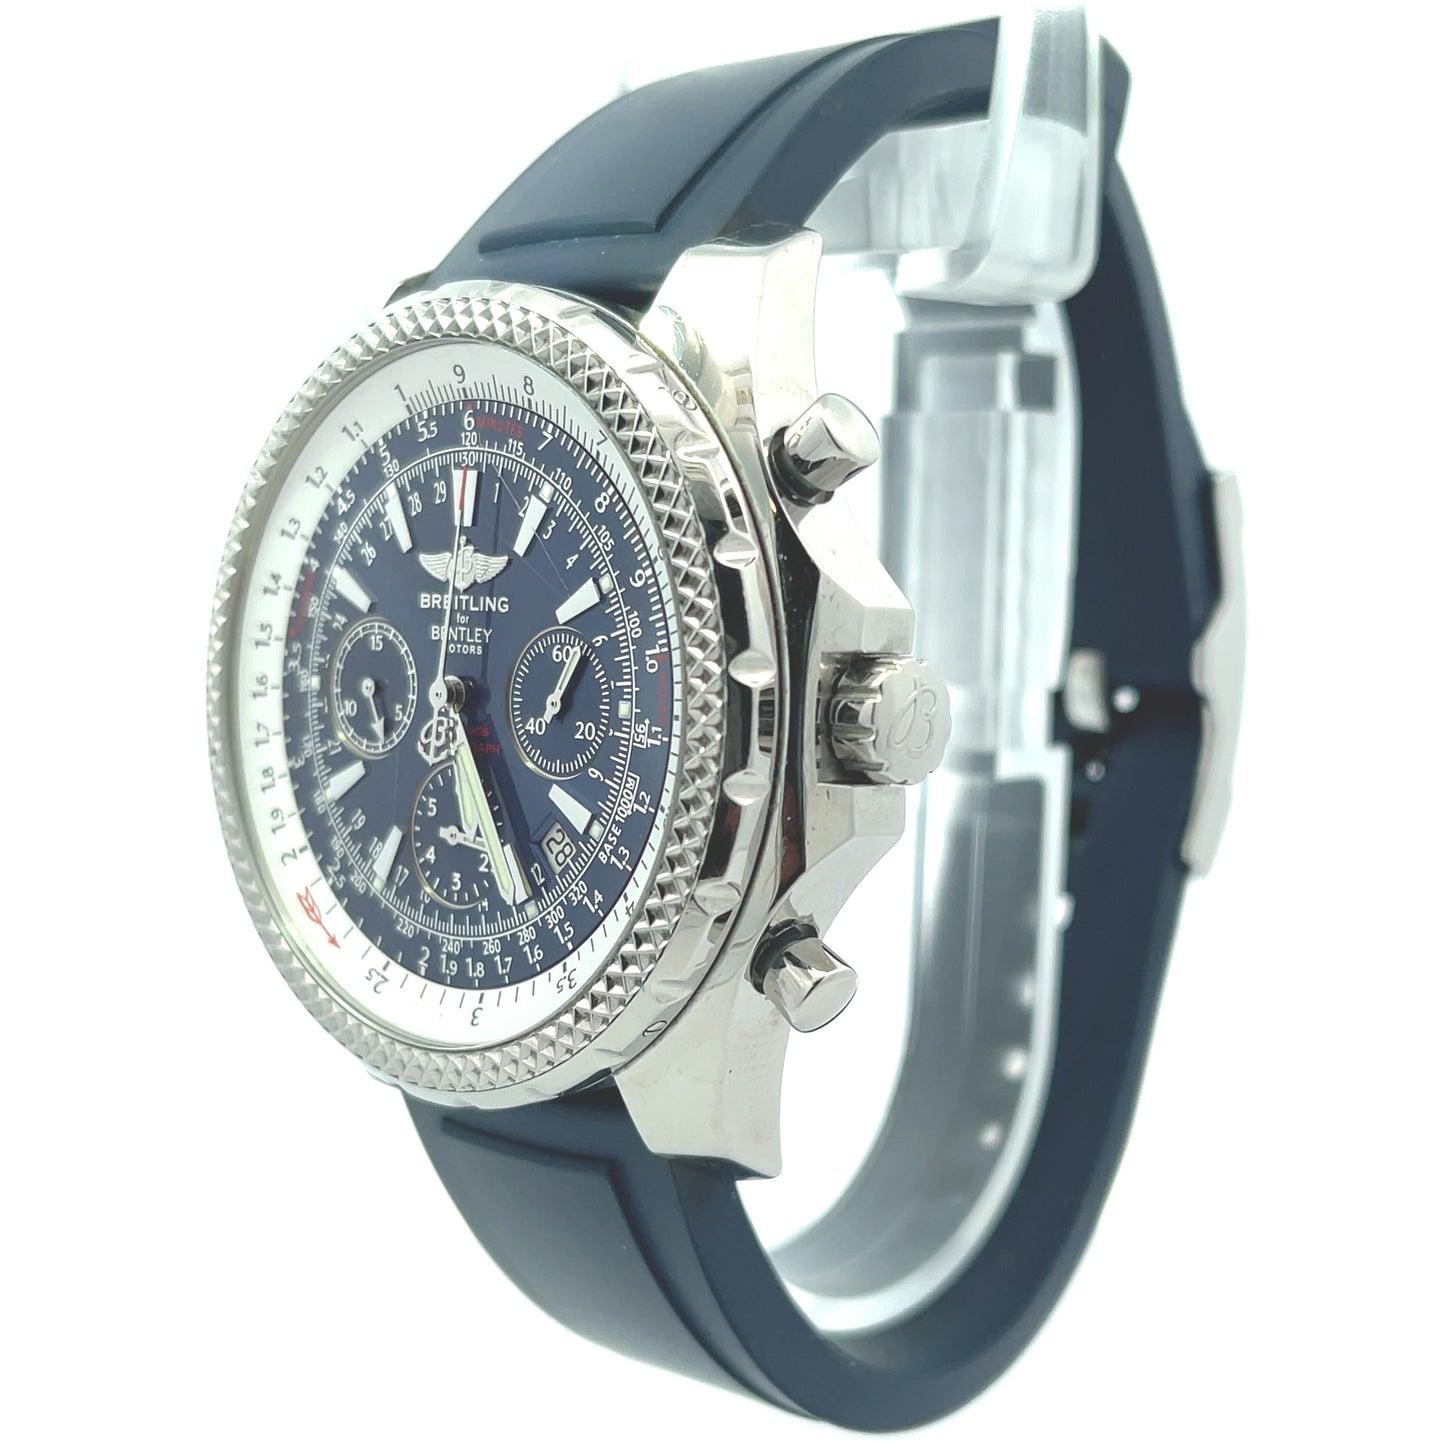 Breitling Bentley Stainless Steel 48mm Blue Chronograph Dial Watch Reference#: A25362 - Happy Jewelers Fine Jewelry Lifetime Warranty